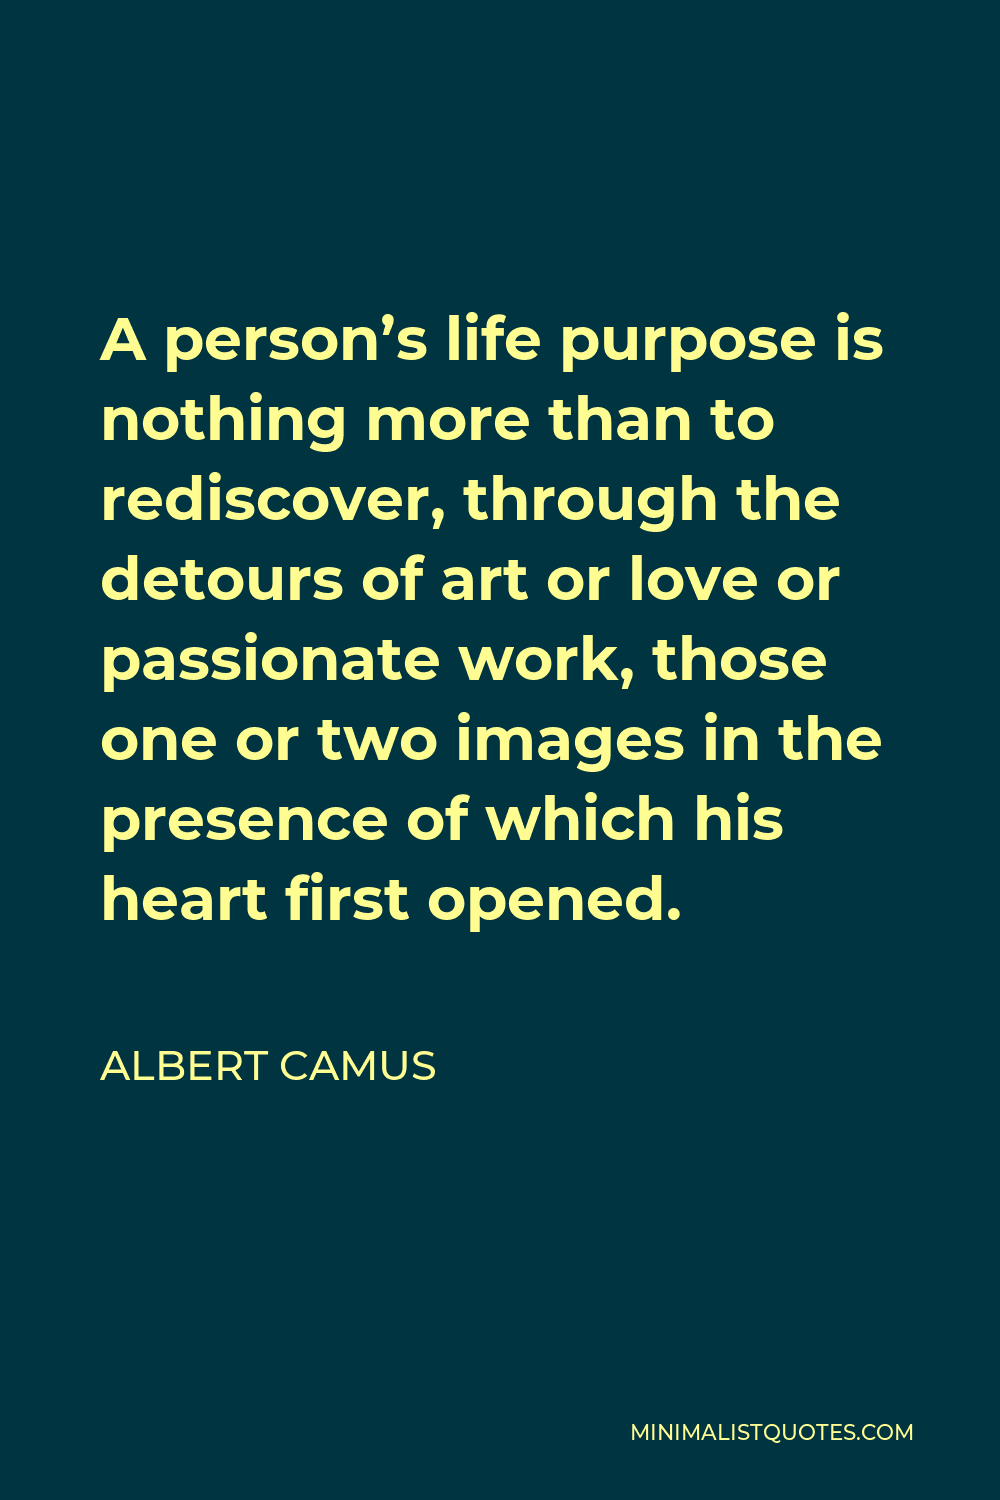 Albert Camus Quote - A person’s life purpose is nothing more than to rediscover, through the detours of art or love or passionate work, those one or two images in the presence of which his heart first opened.